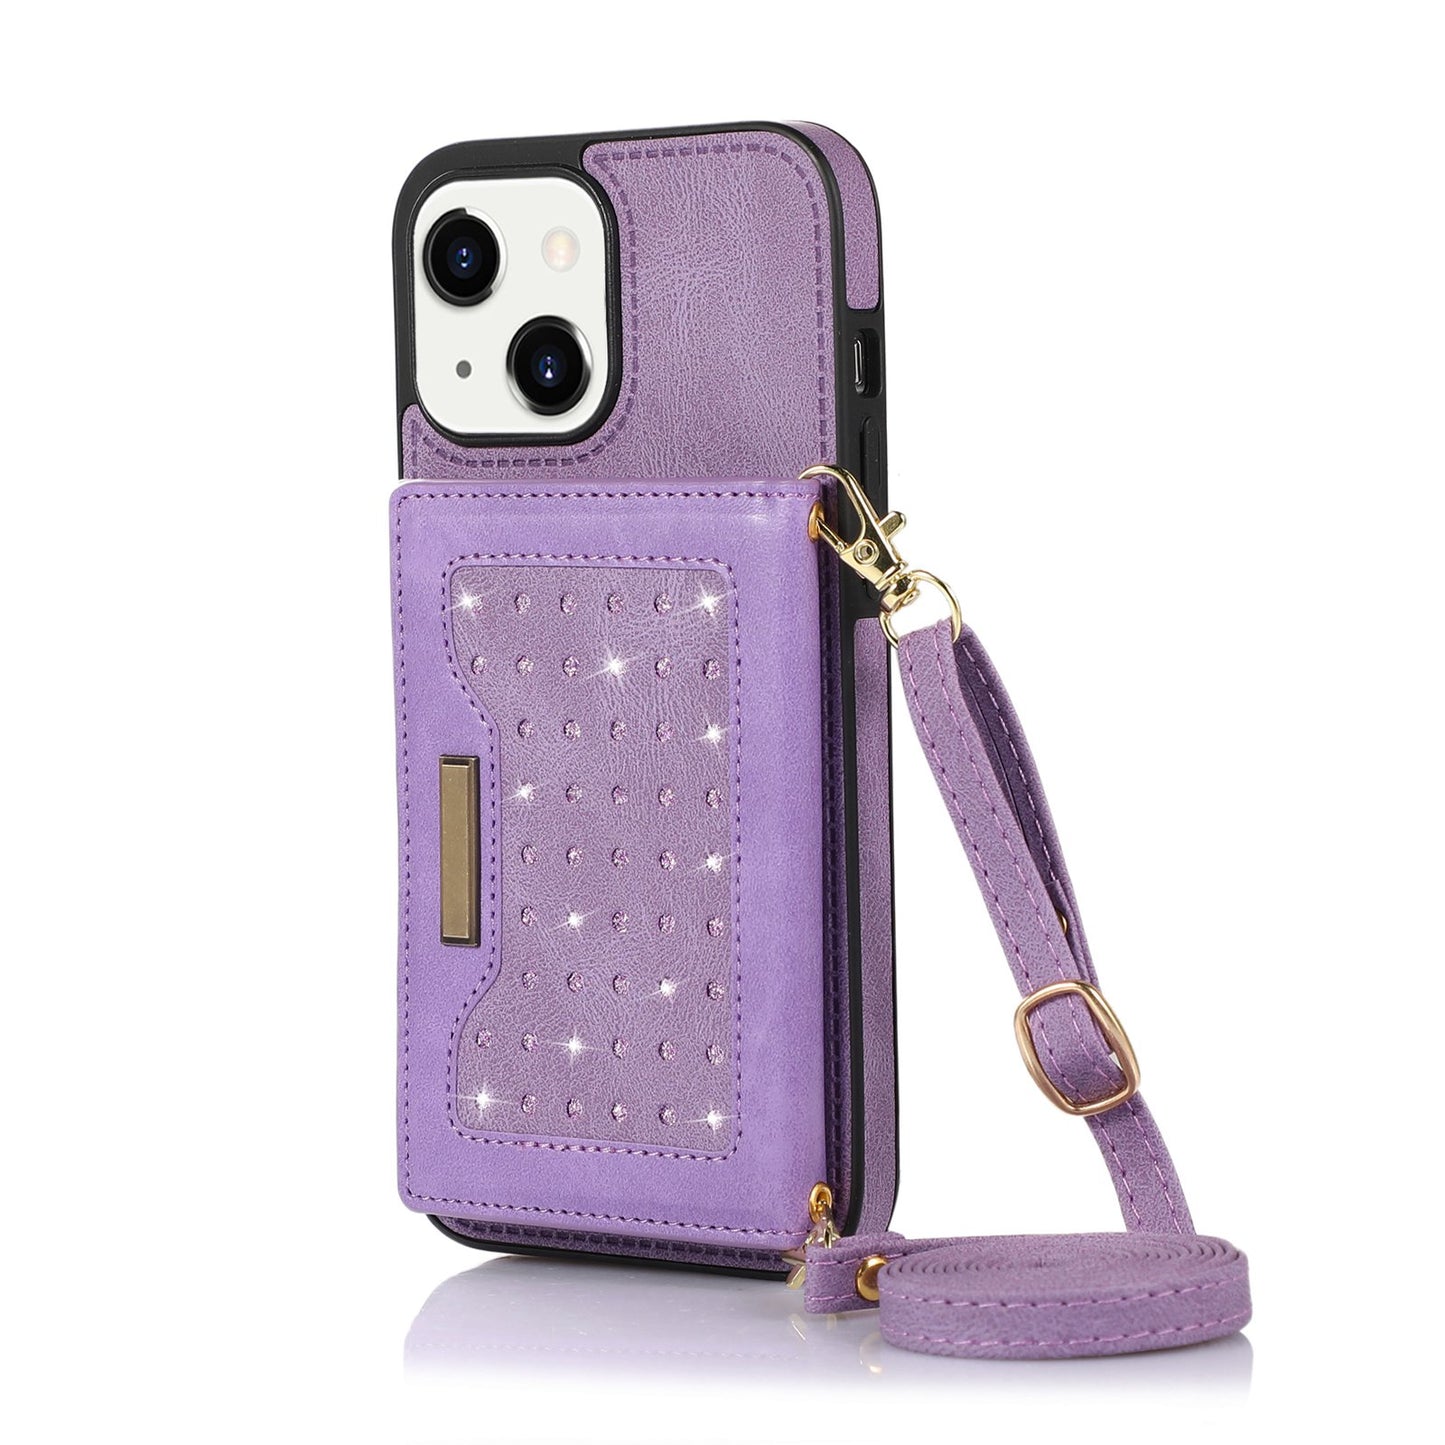 Stylish Leather Wallet Phone Case with Shoulder Strap for iPhone 11/12/13/14 - Pink Bling Design for Women on the Go